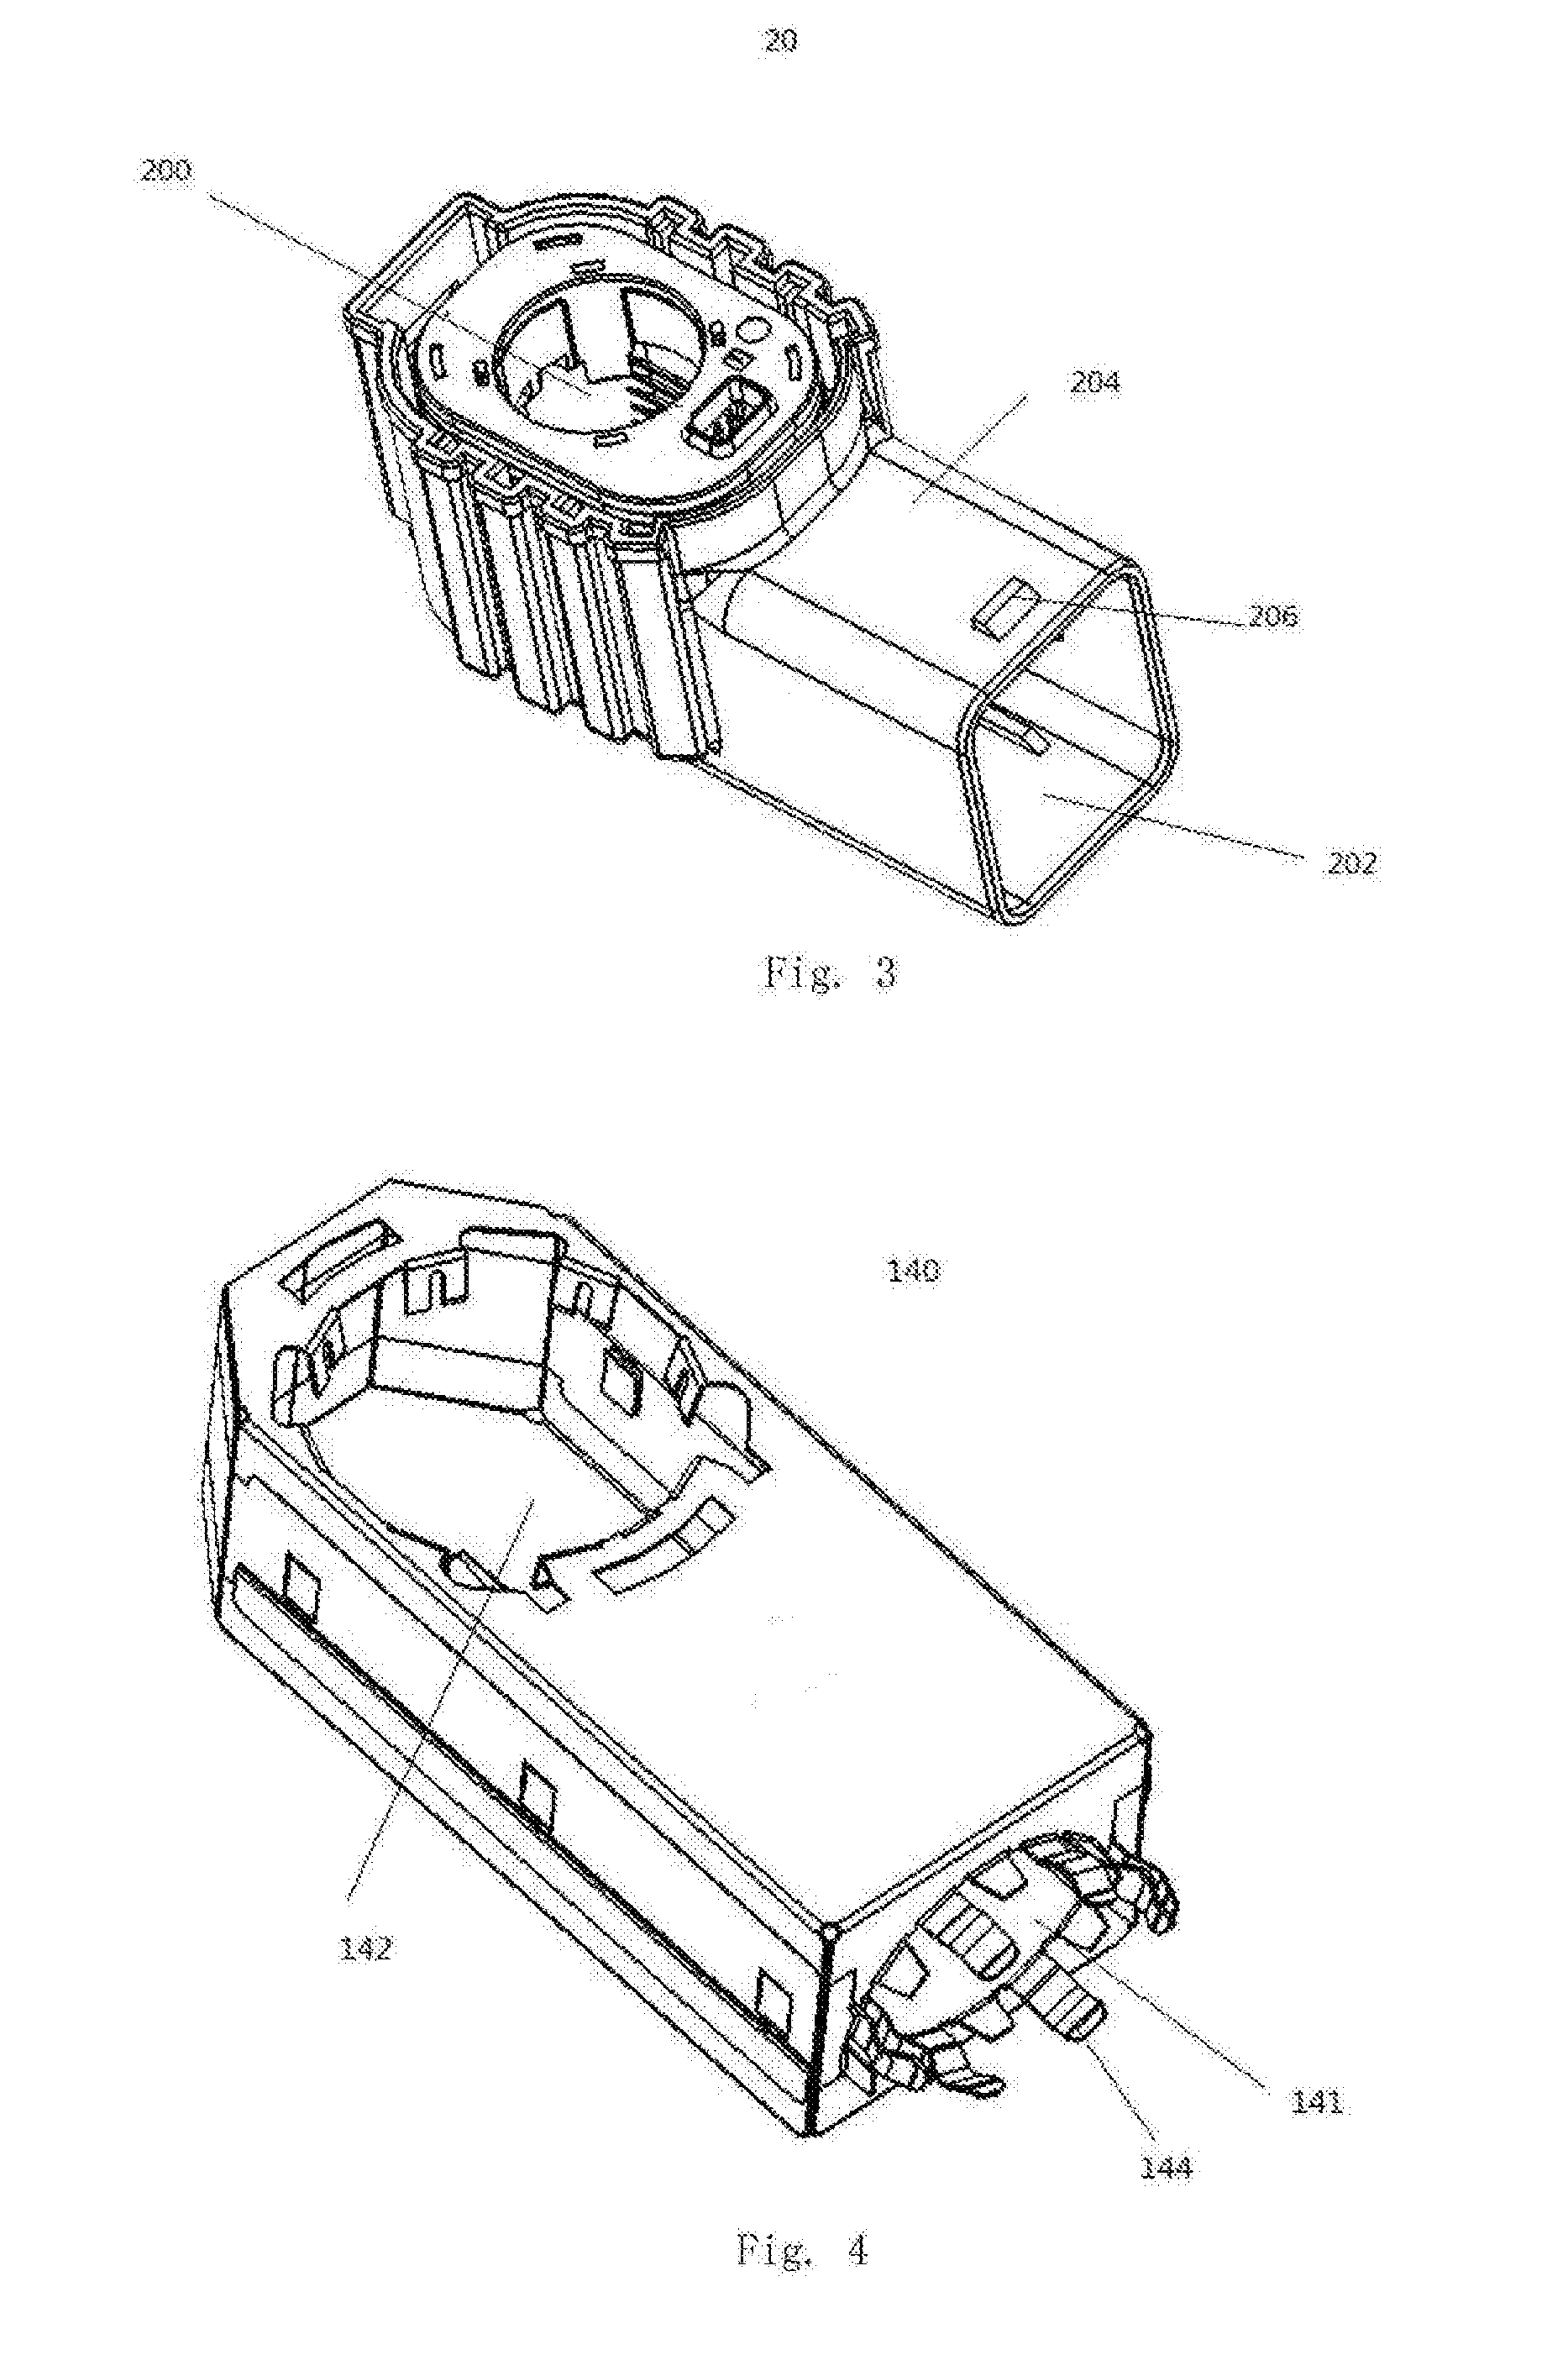 Terminal assembly with cable and connector assembly